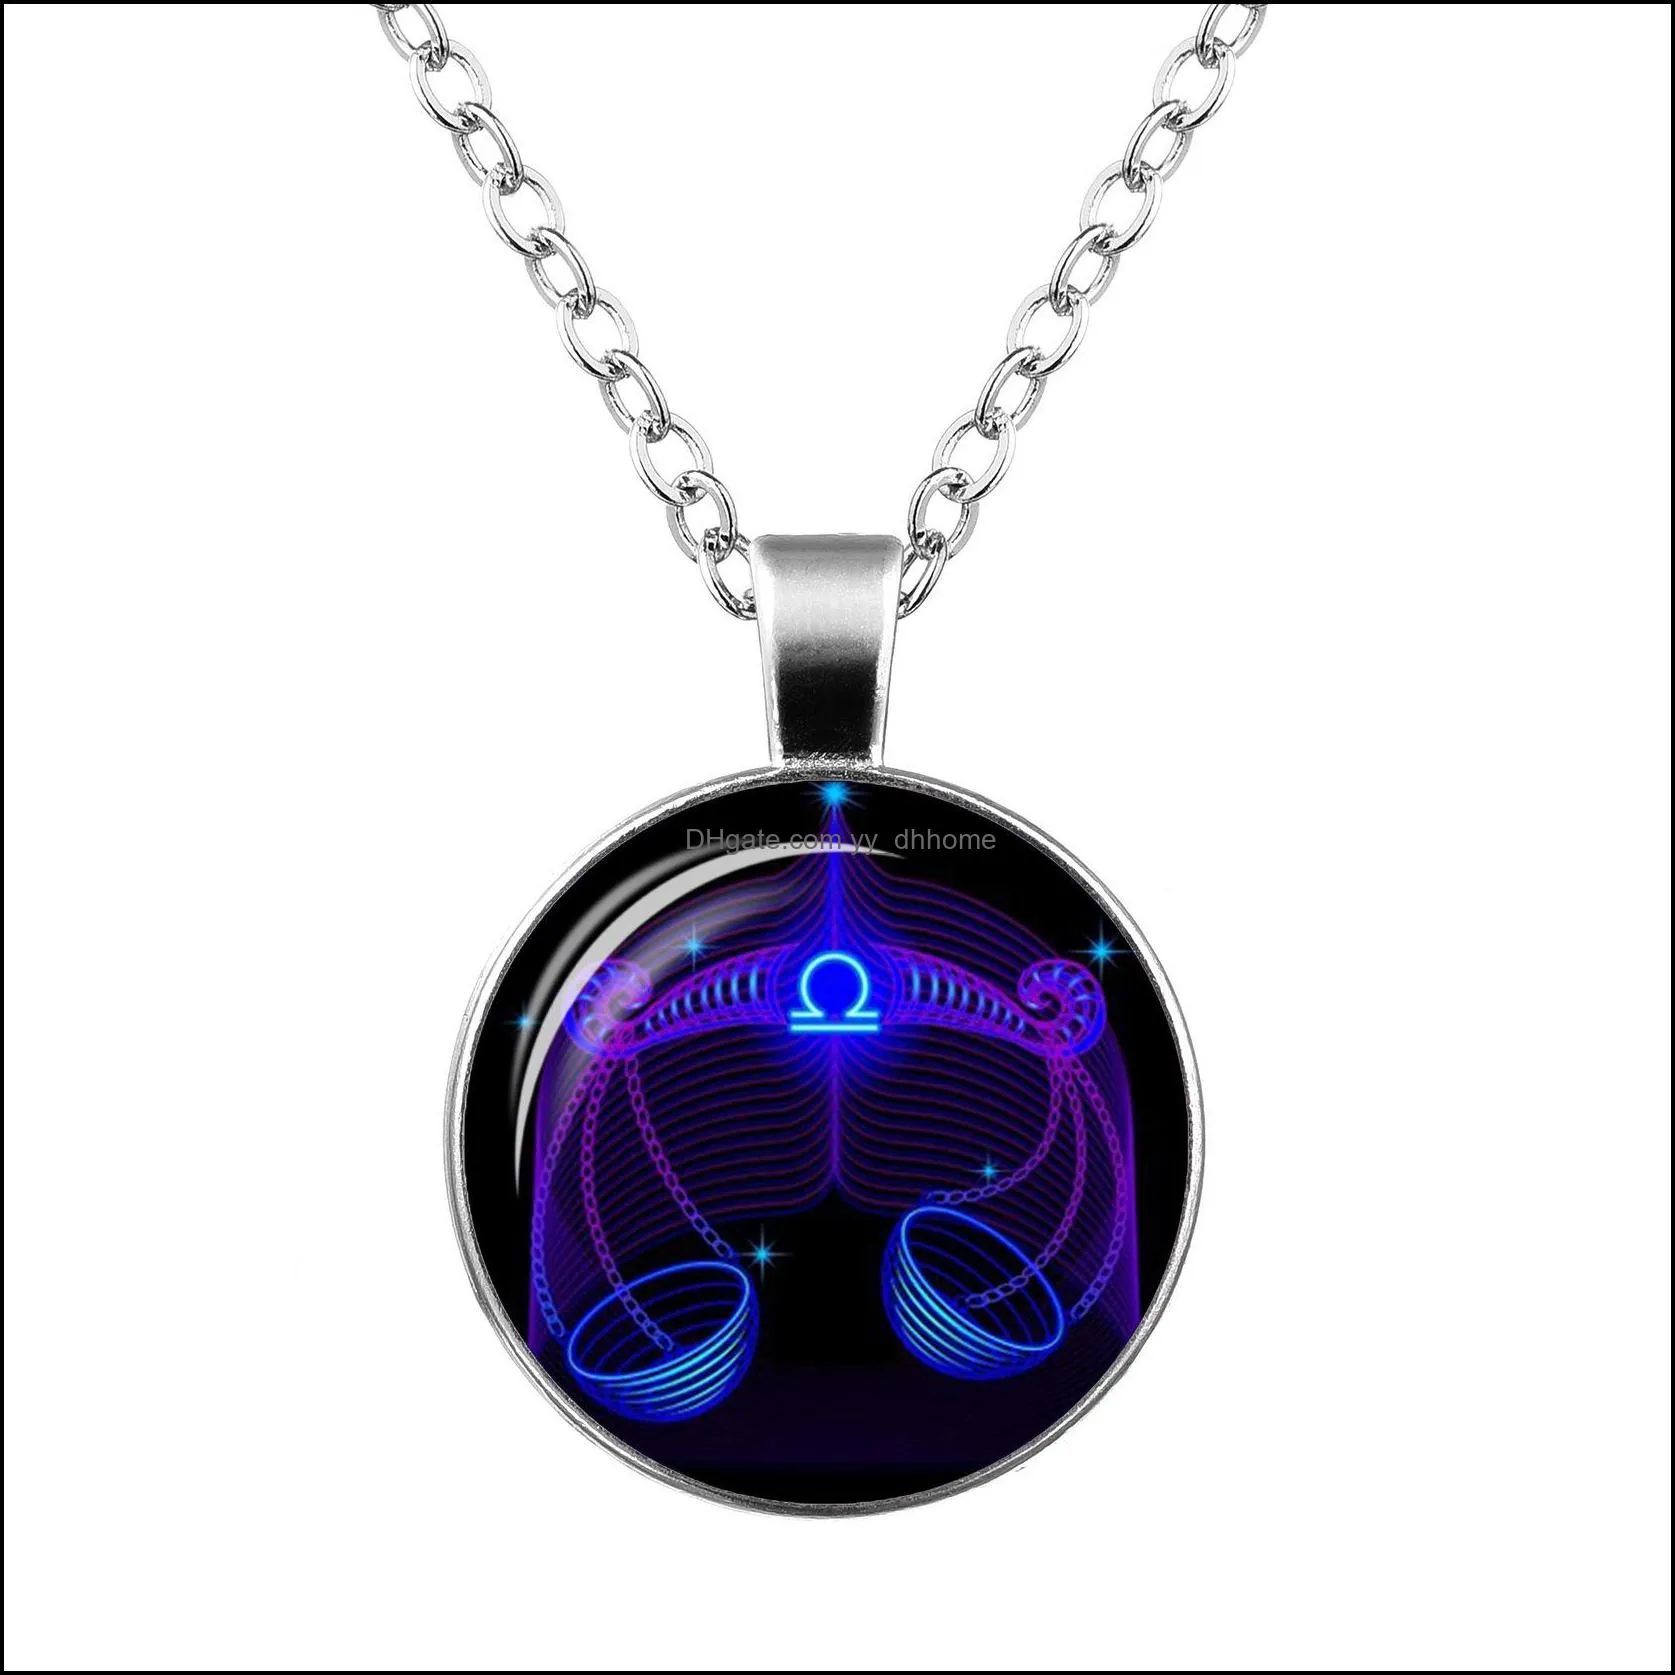 new fashion galaxy 12 constellation design zodiac sign horoscope astrology pendant necklace for women men glass cabochon